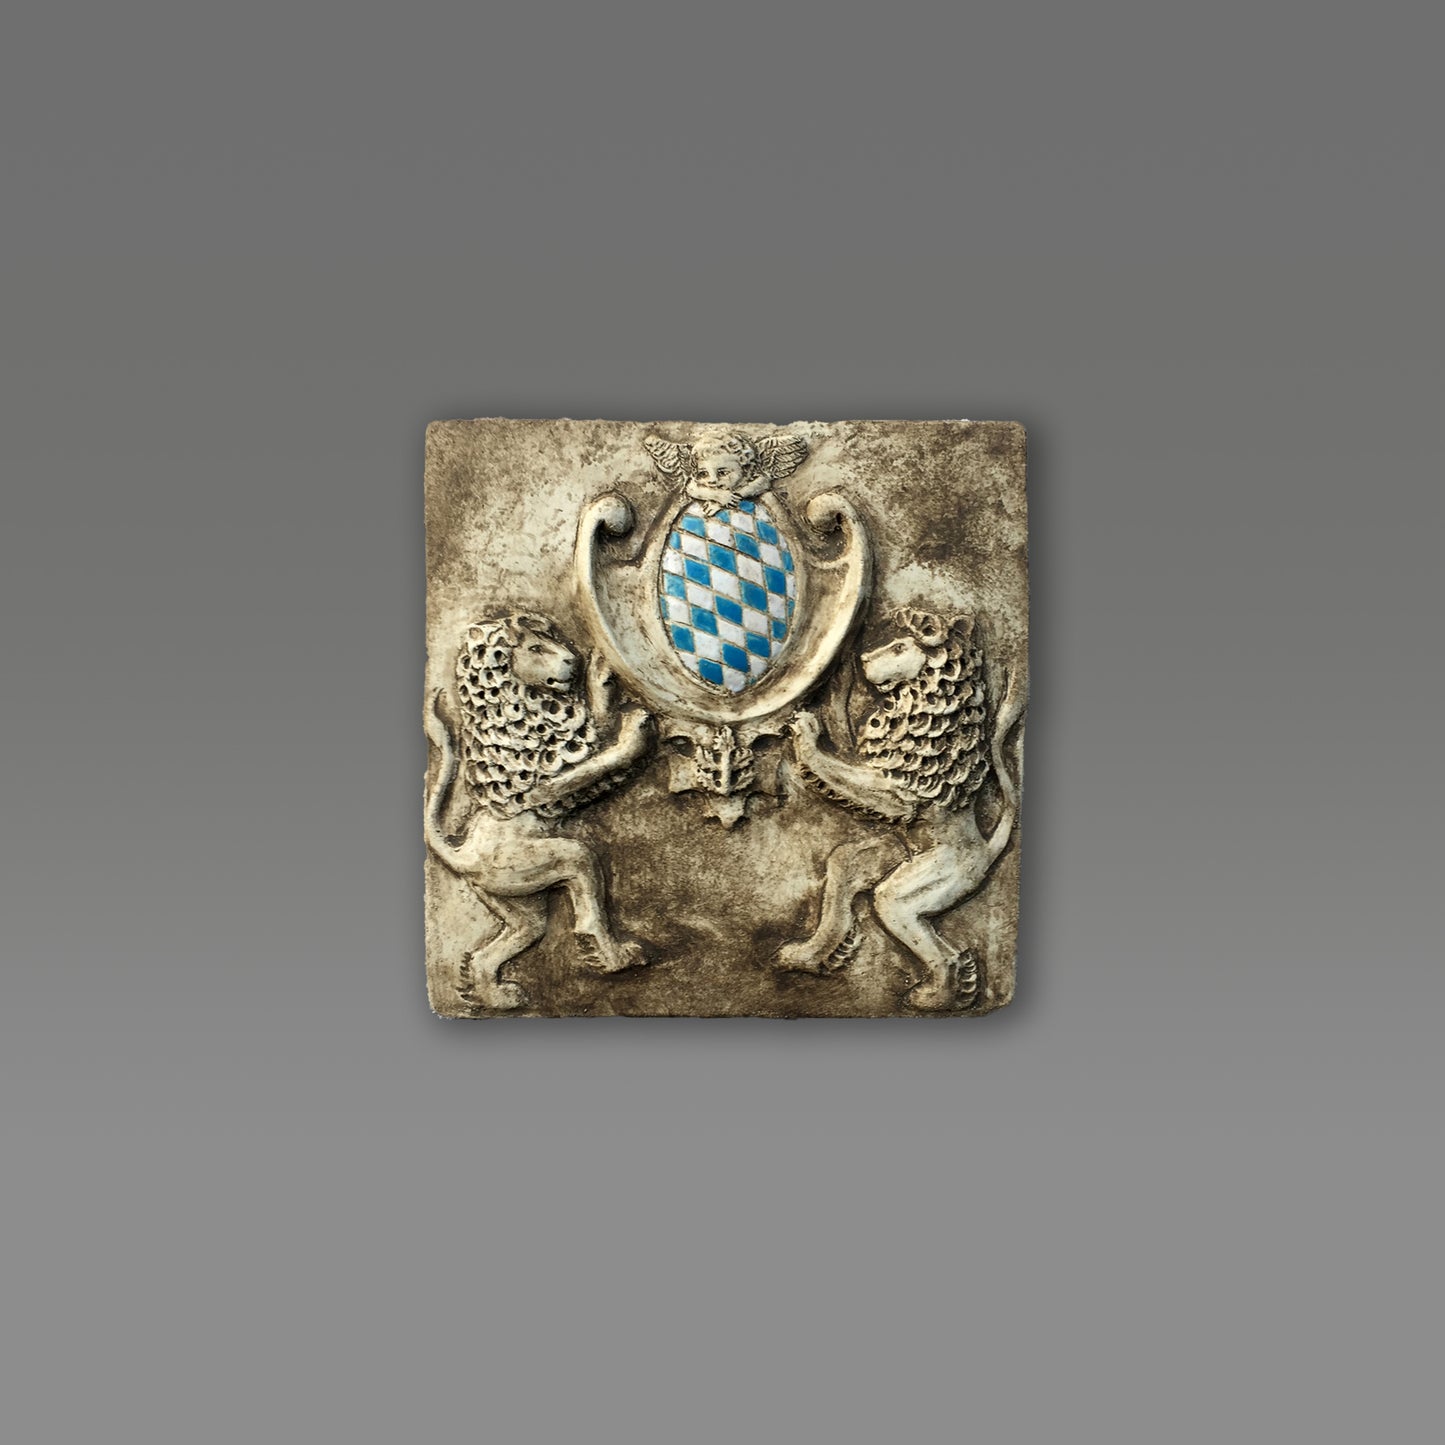 Bavarian baroque lions holding a shield